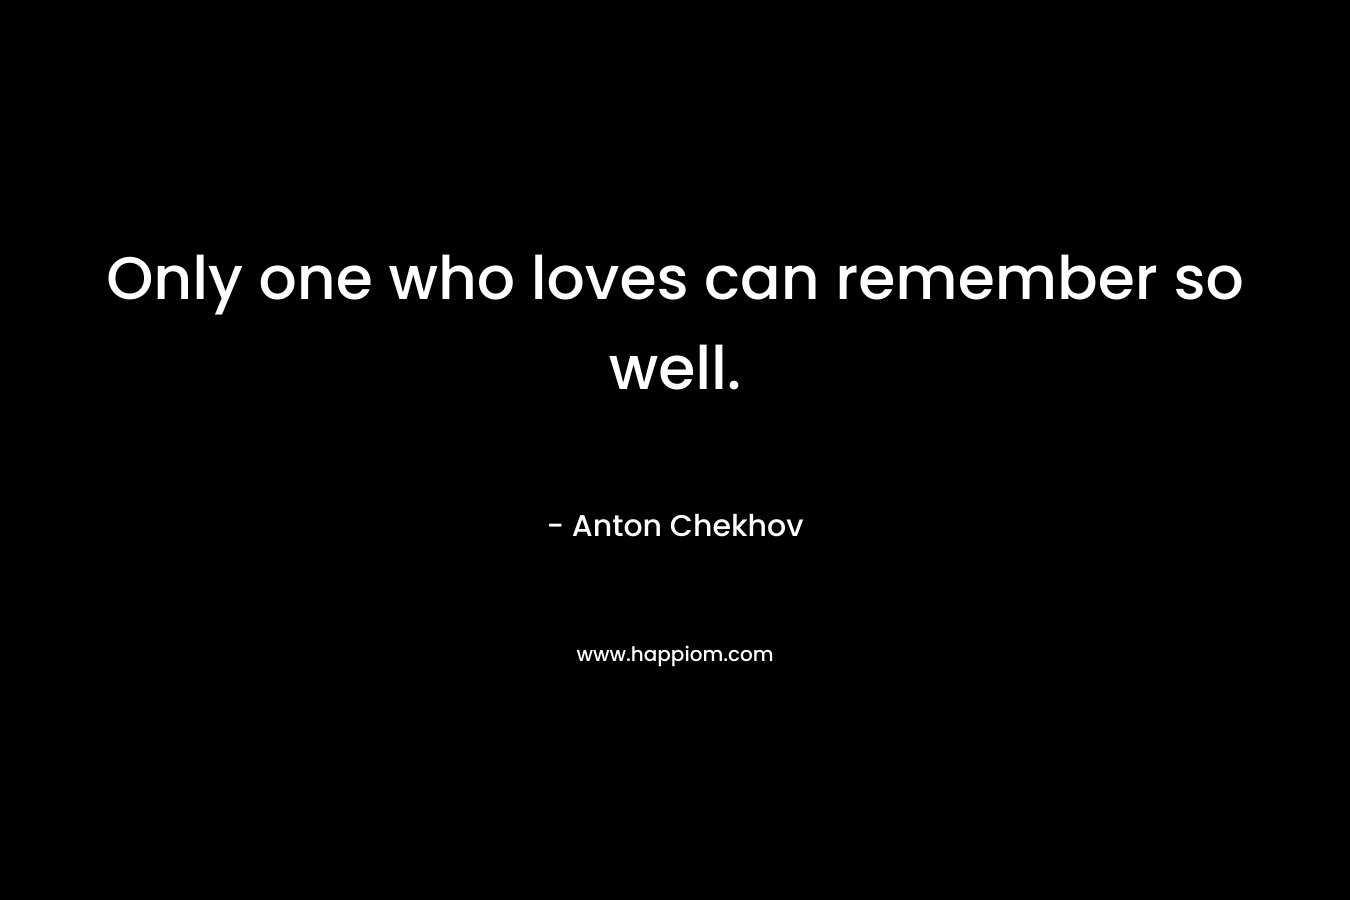 Only one who loves can remember so well. – Anton Chekhov